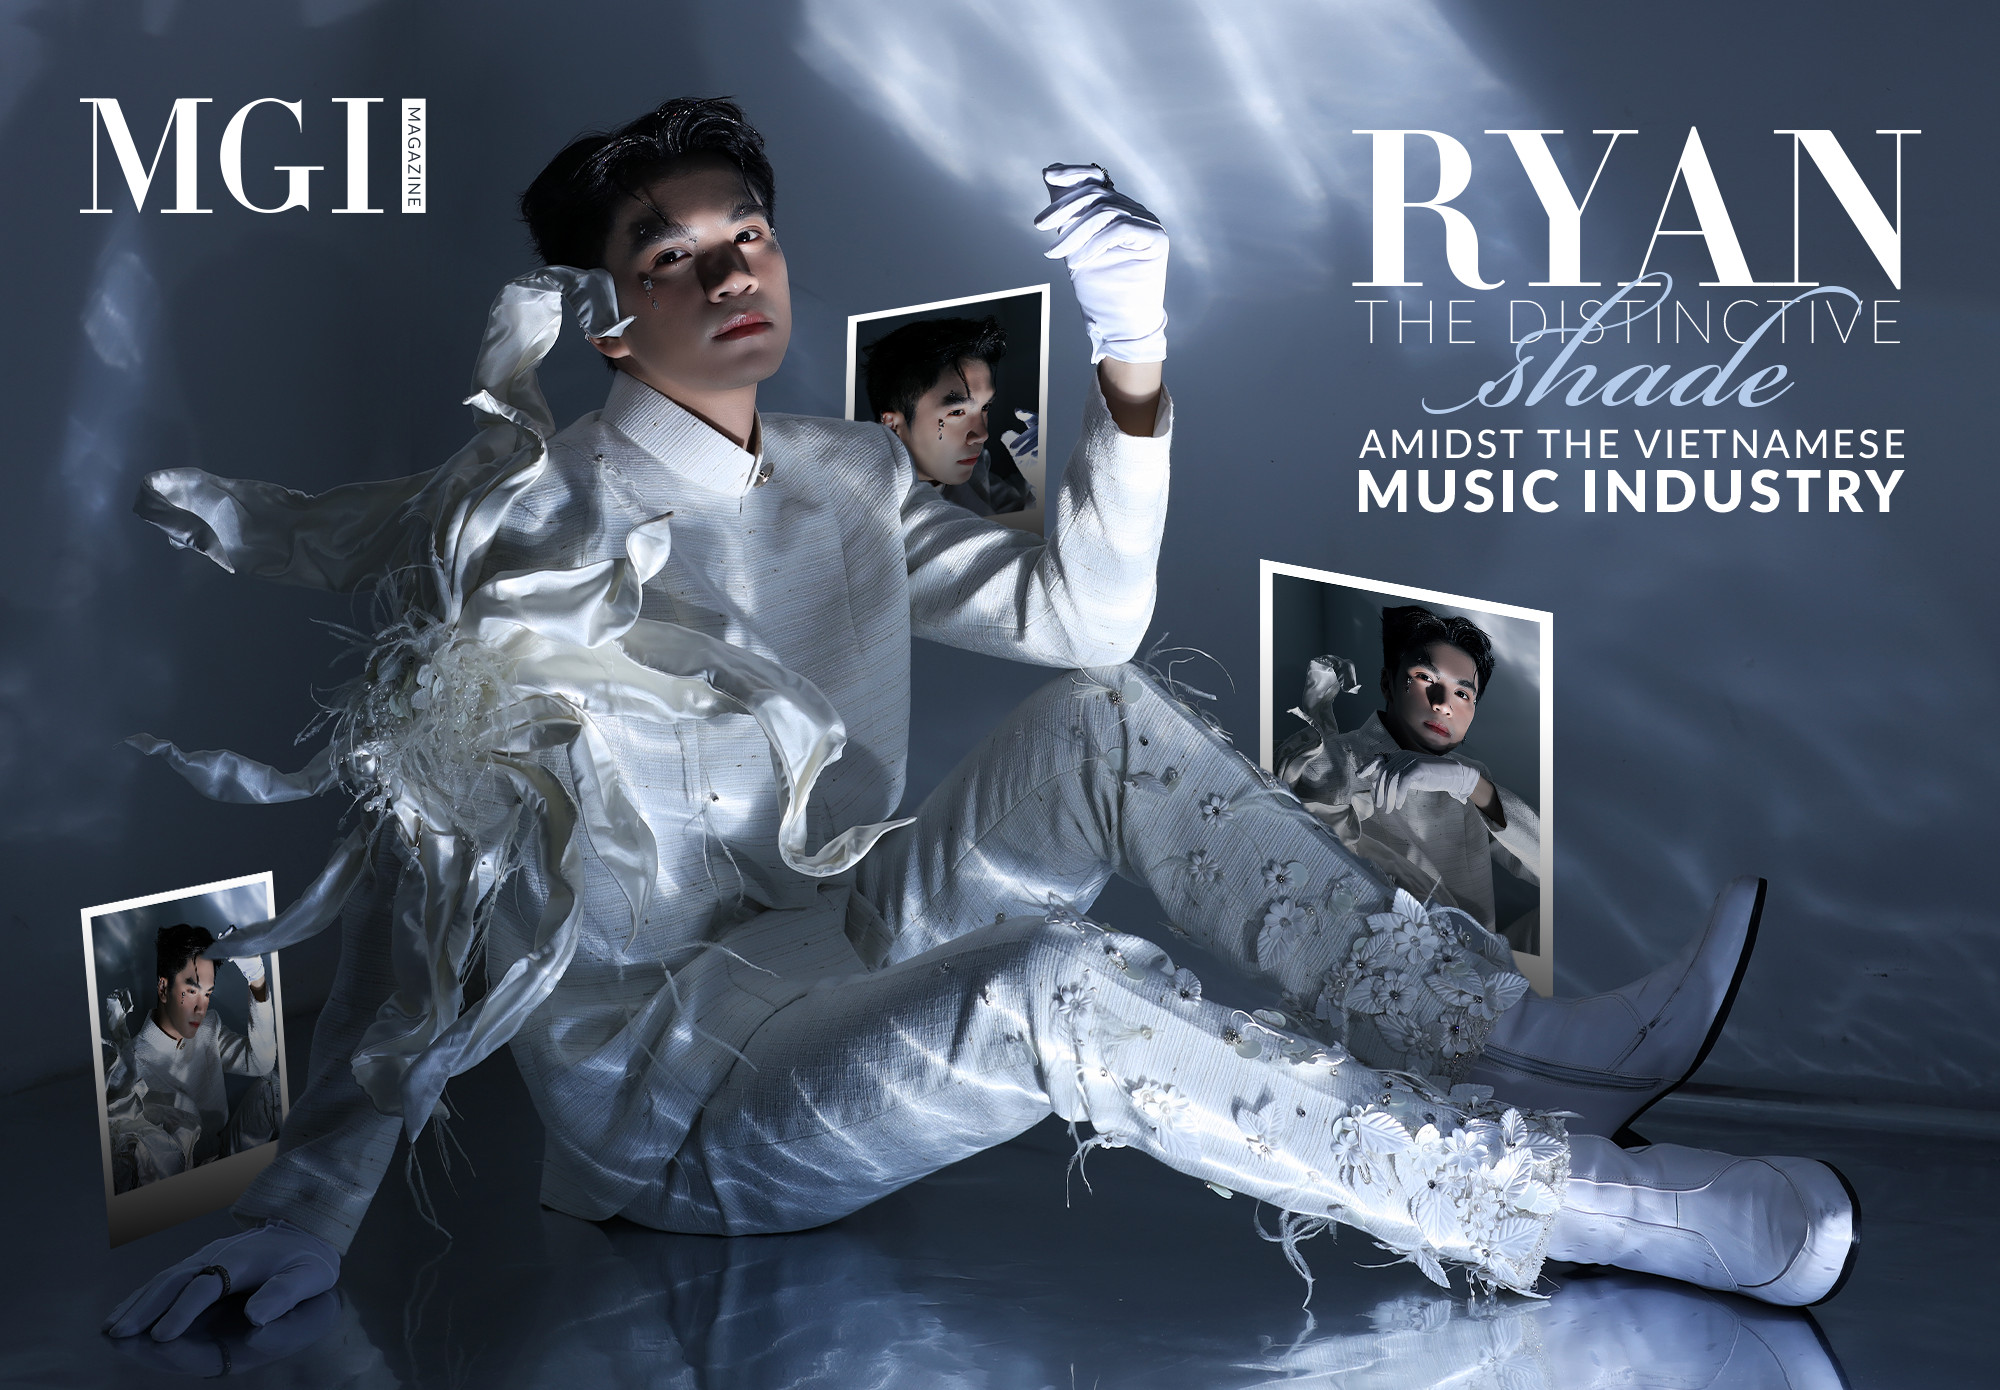 Ryan - the distinctive "shade" amidst the Vietnamese music industry